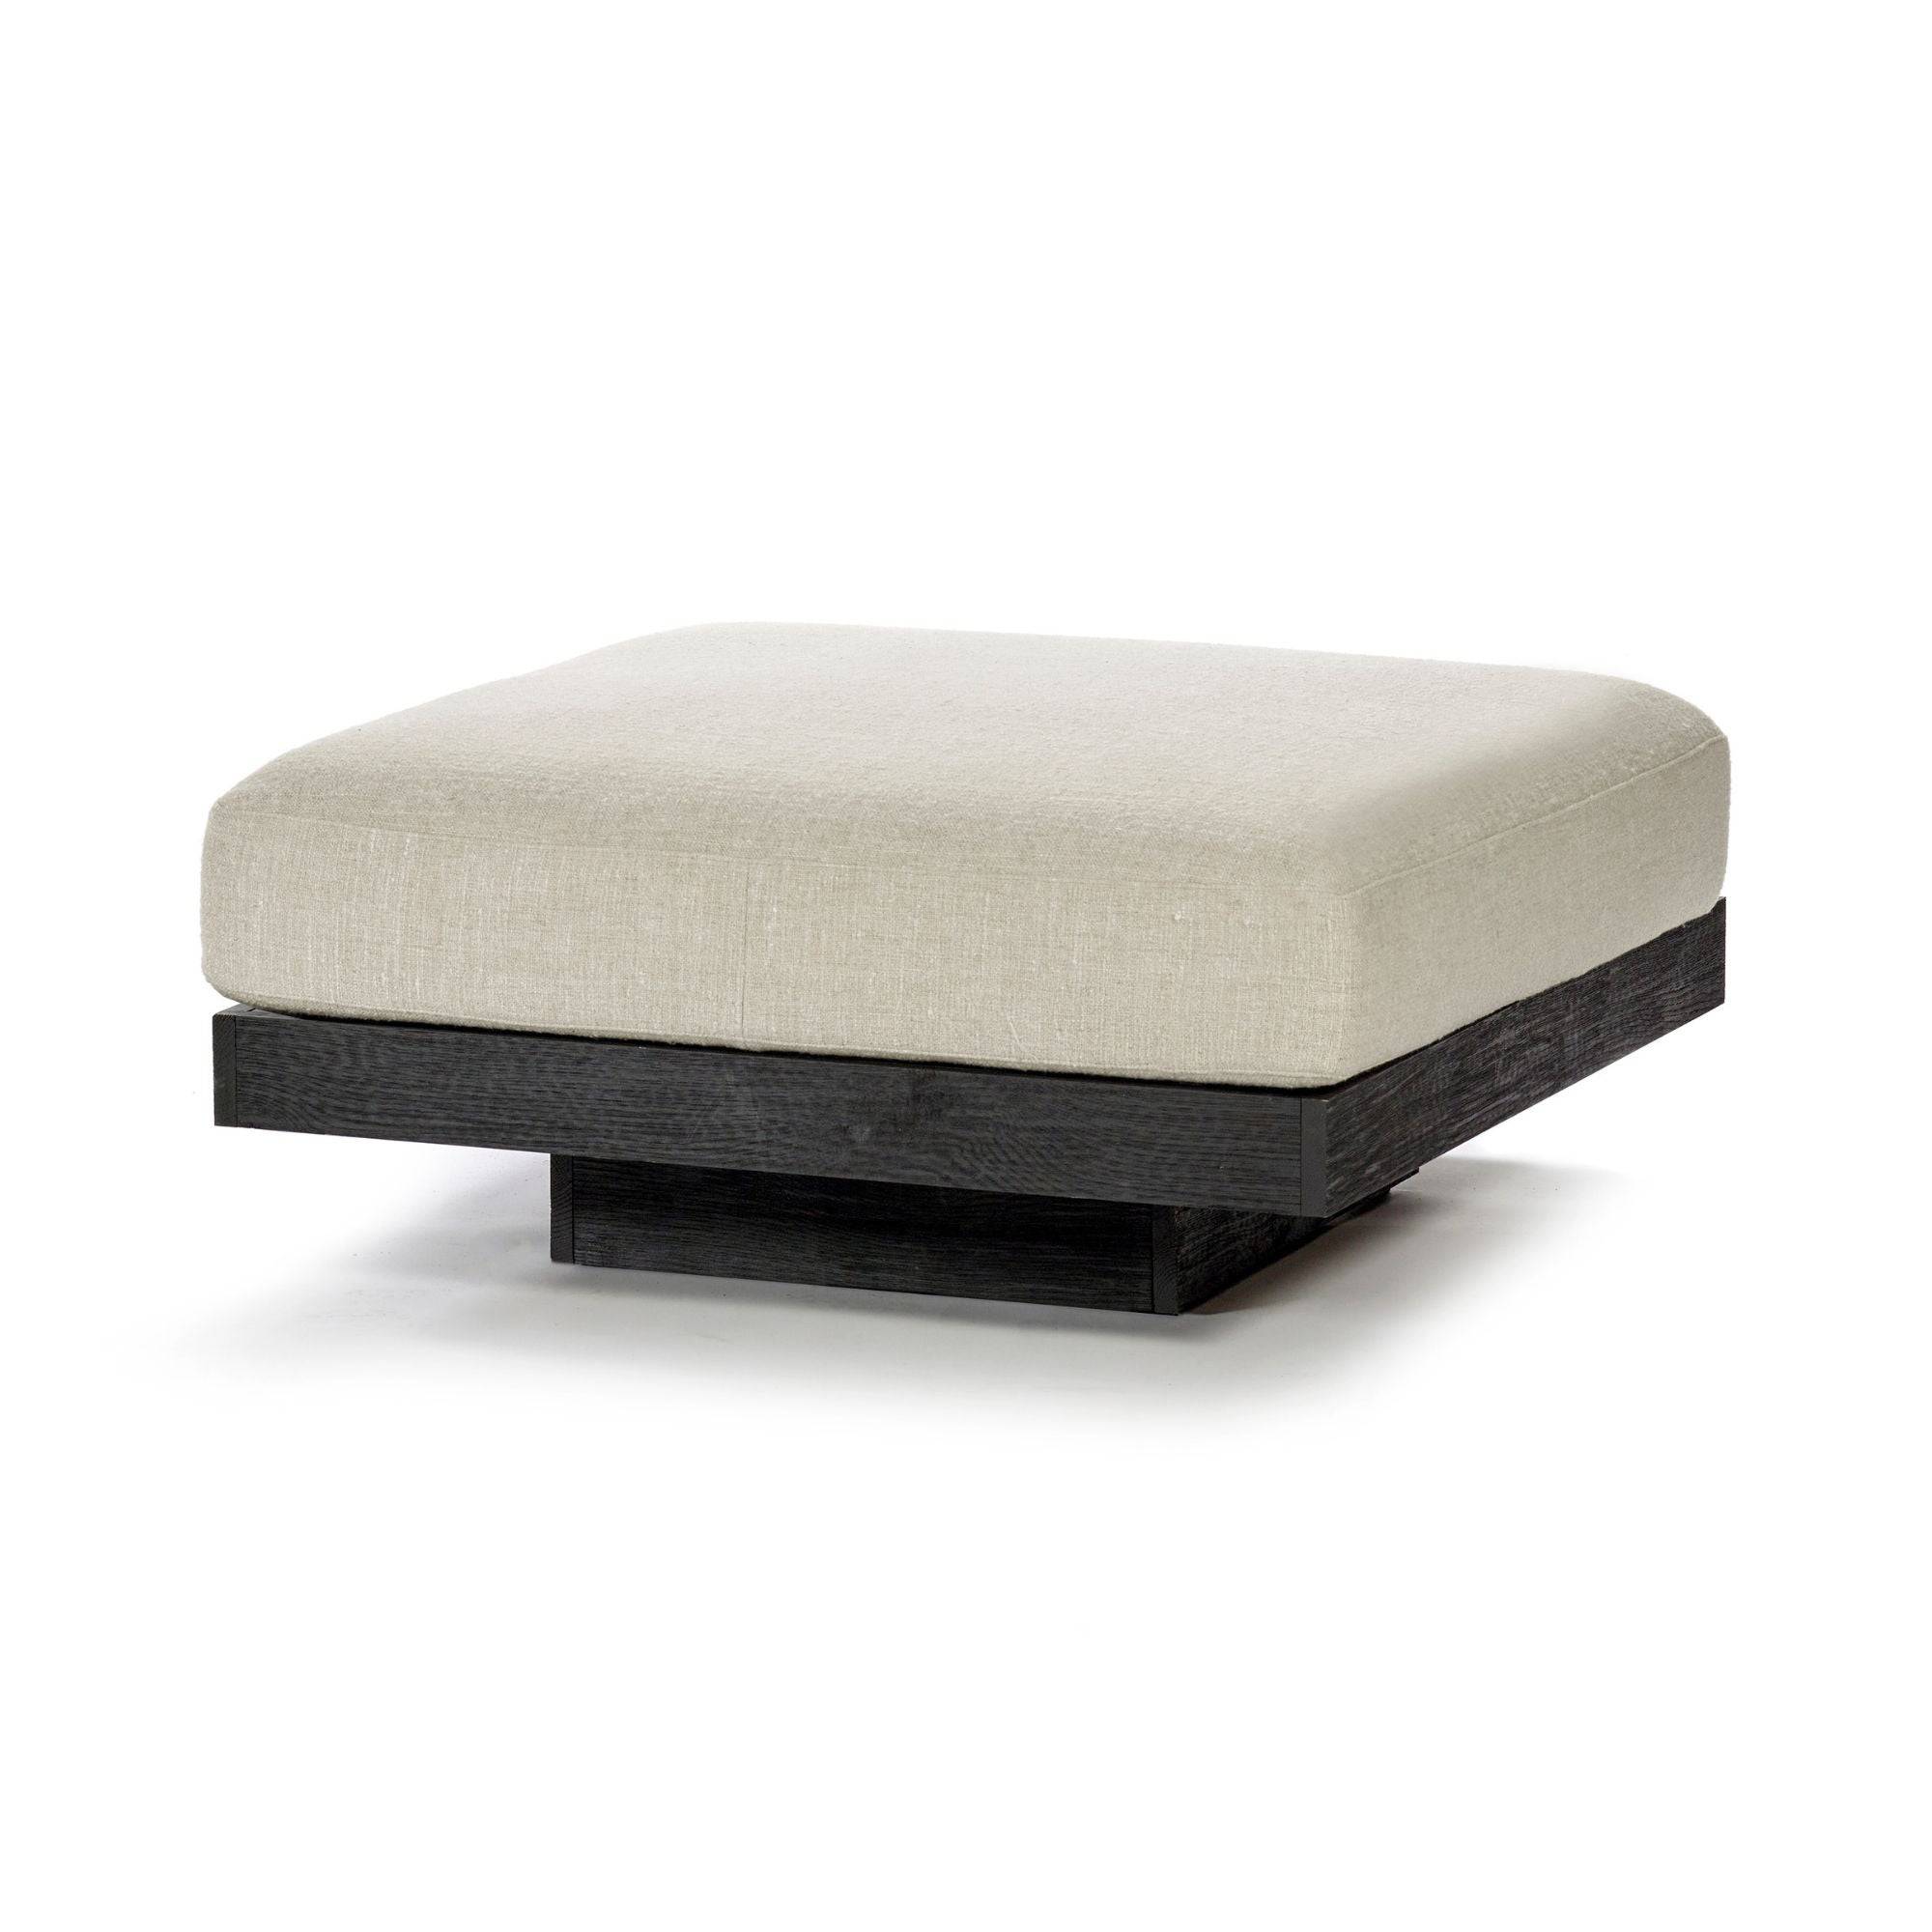 Rudolph Footstool - THAT COOL LIVING